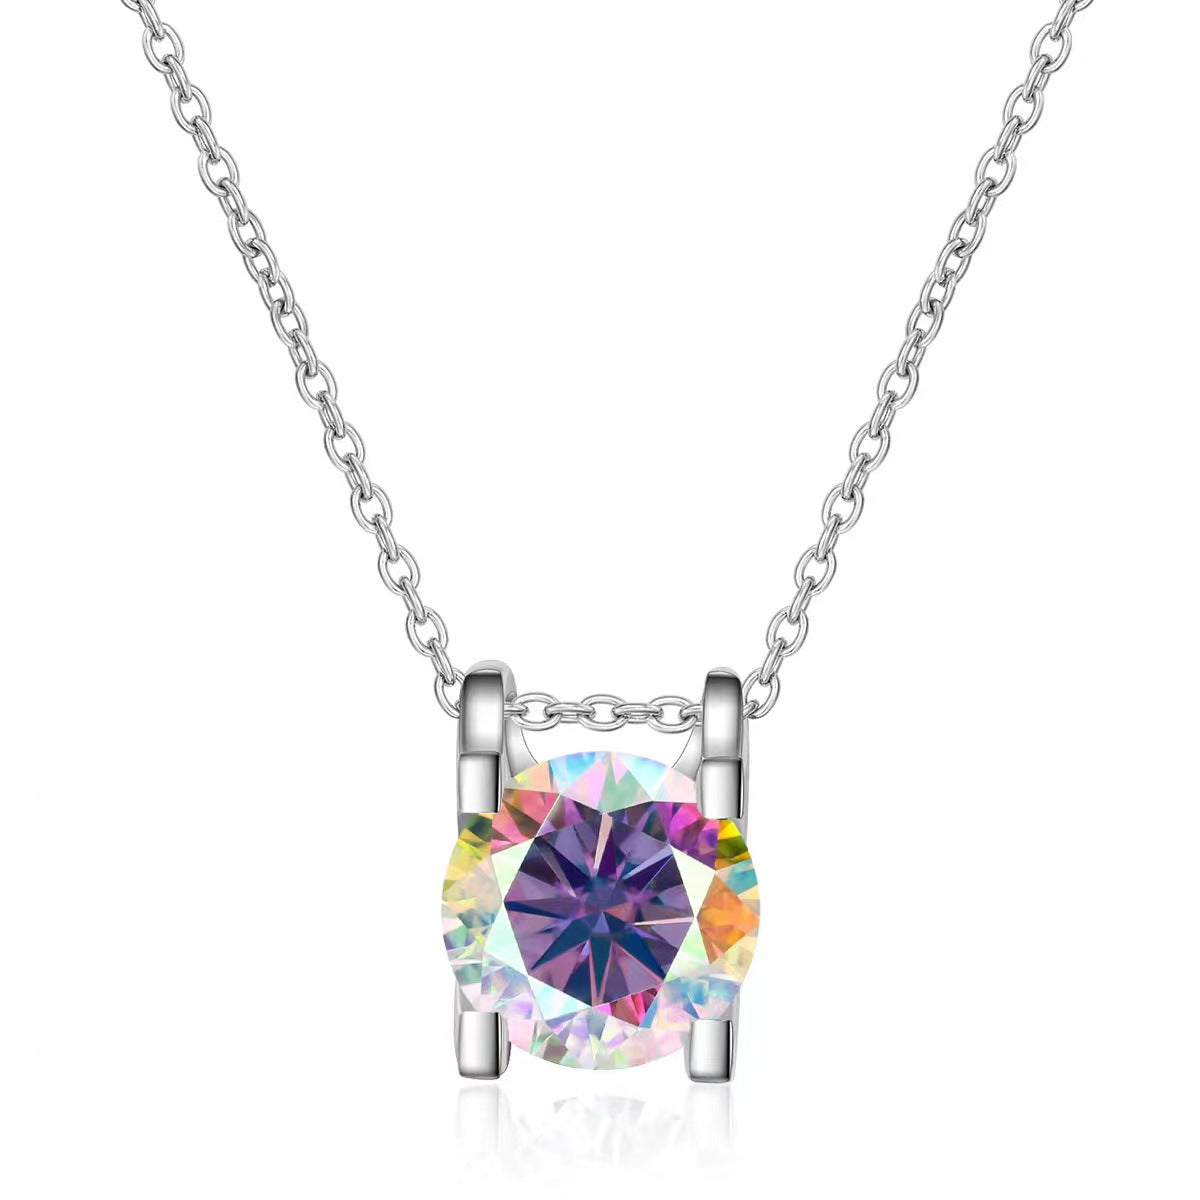 A/B Moissanite necklace for women